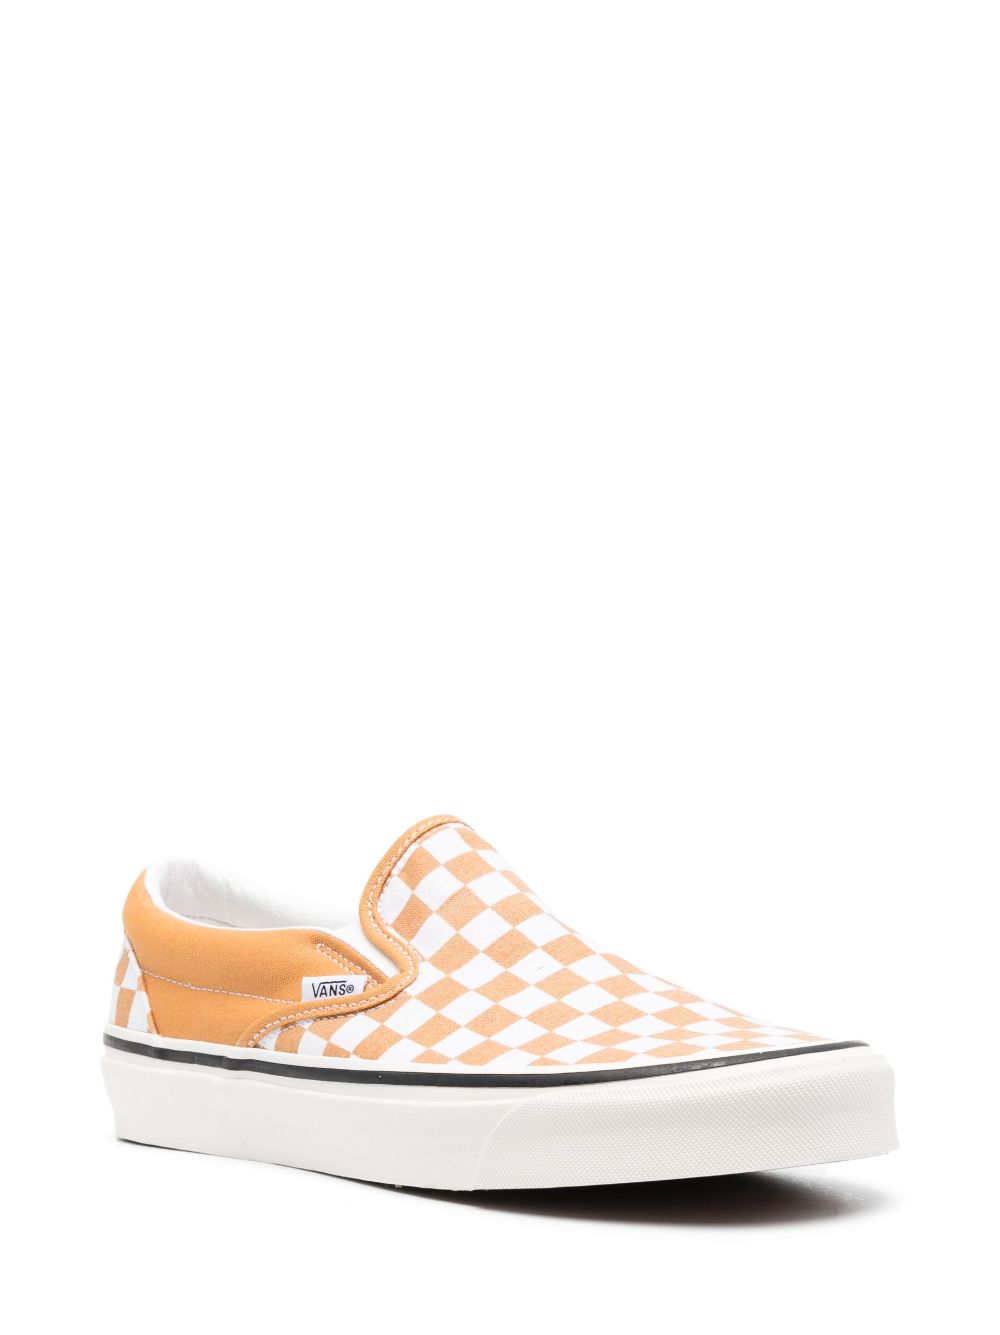 Classic checked slip-on sneakers